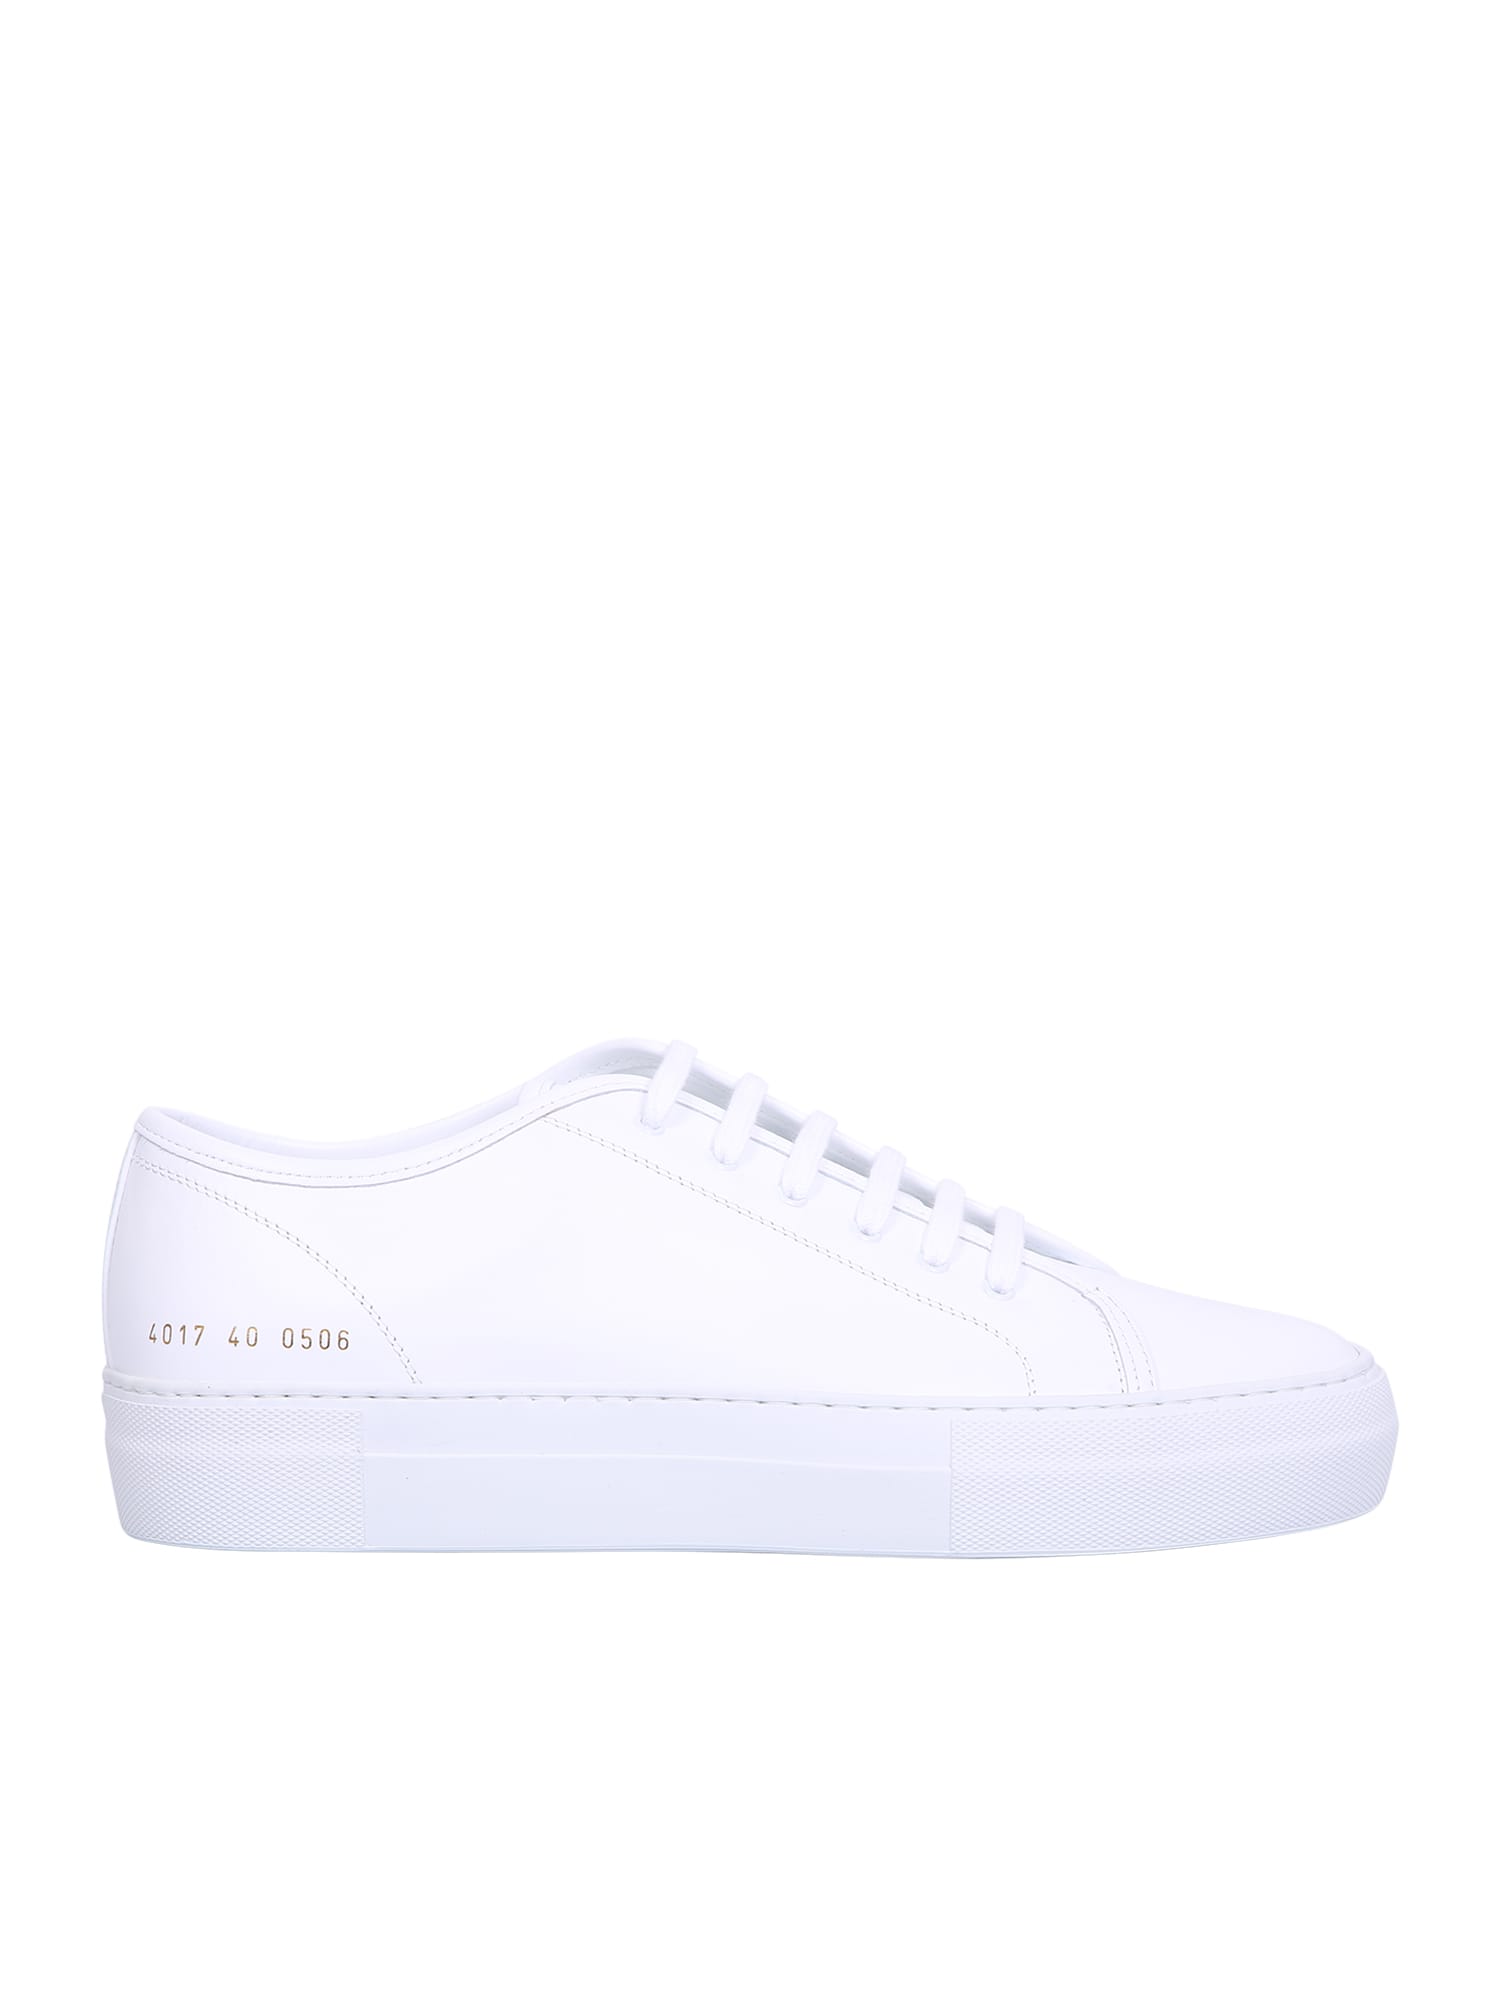 COMMON PROJECTS TOURNAMENT SNEAKERS